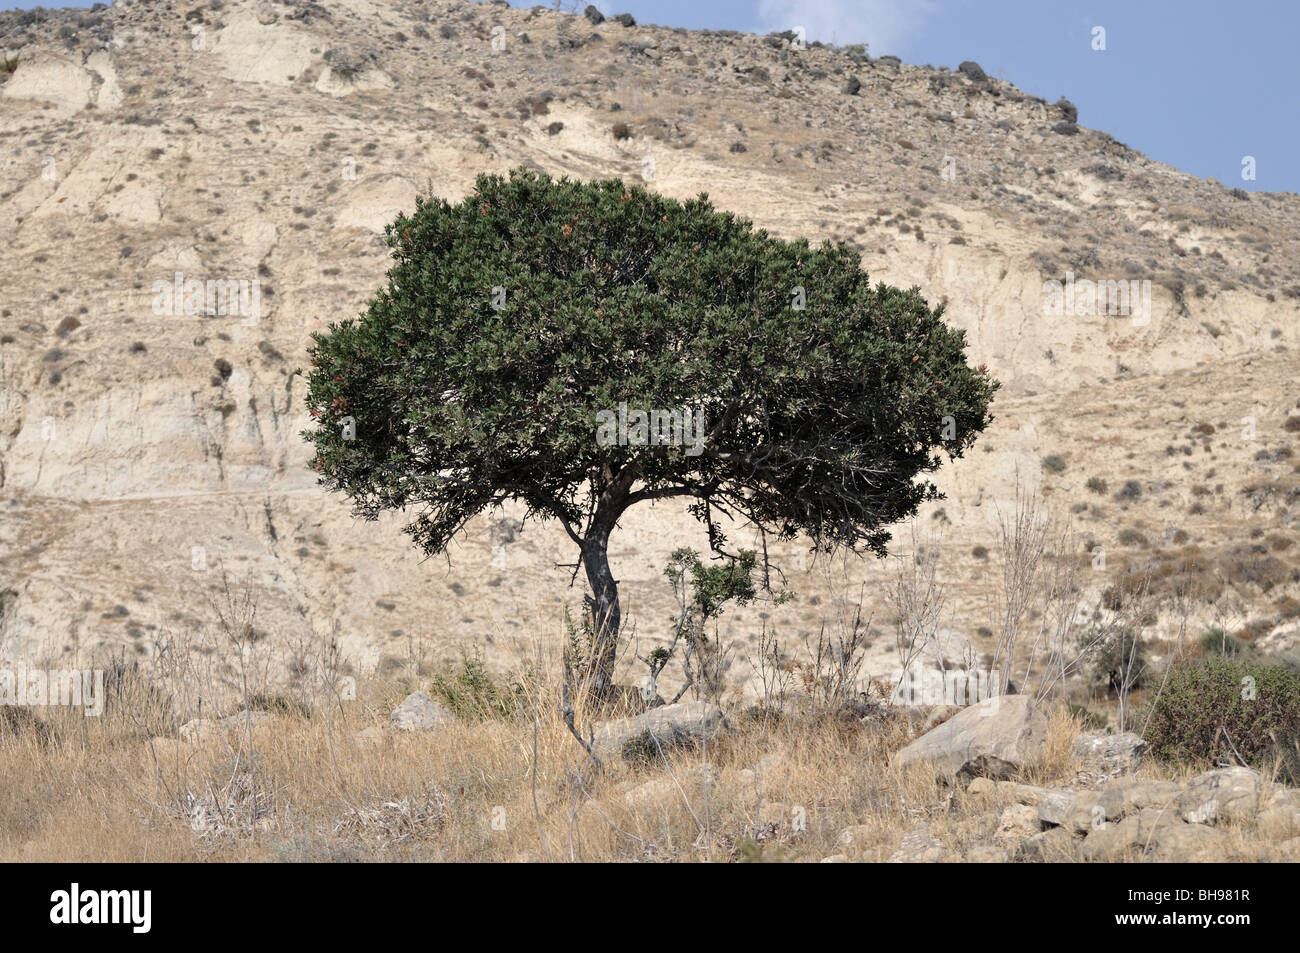 Lone tree in the arid Cypriot landscape Stock Photo